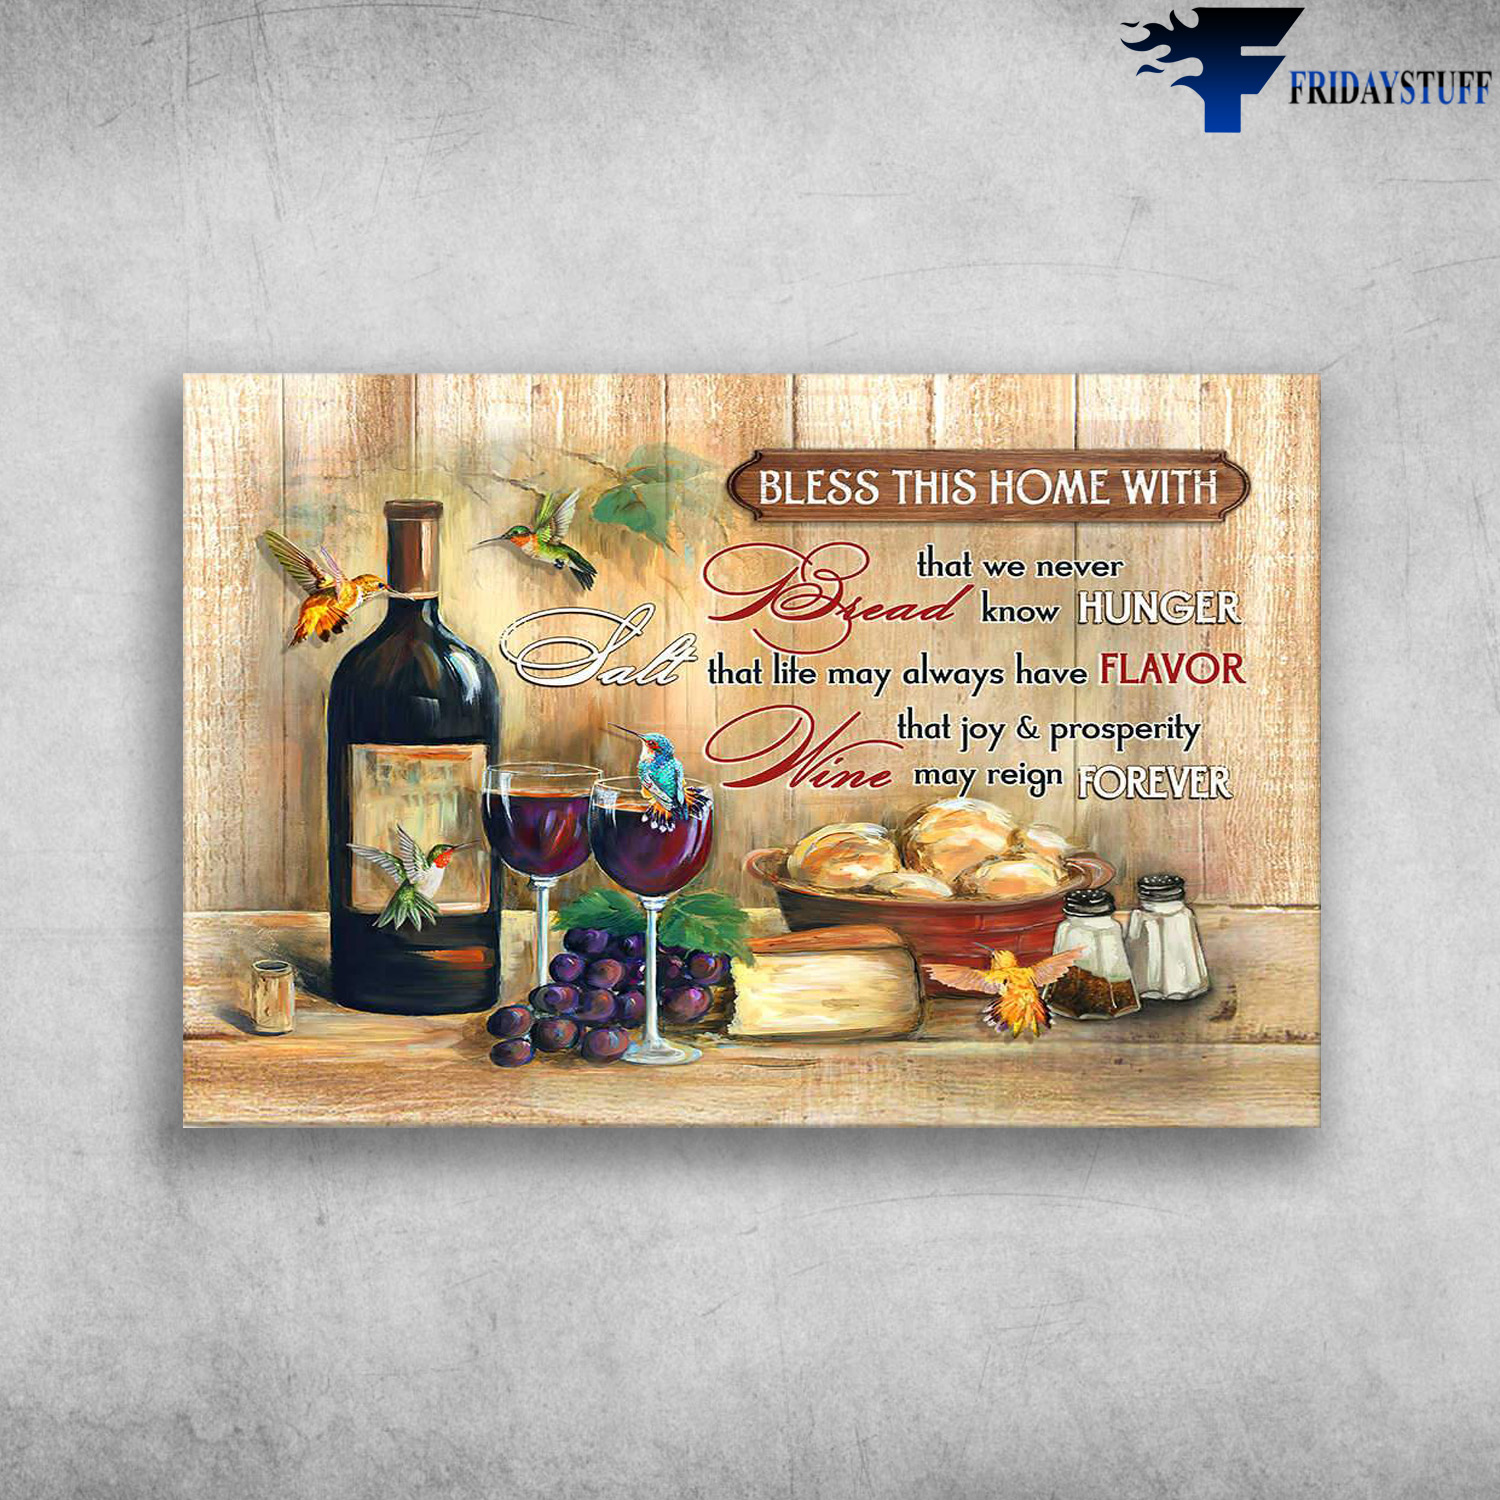 Hummingbird, Wine, And Food - Bless This Home With, That We Never Bread Know Hunger, Salt That Lite May Always Have Flavor, That Joy And Prosperity, Wine May Reign Forever